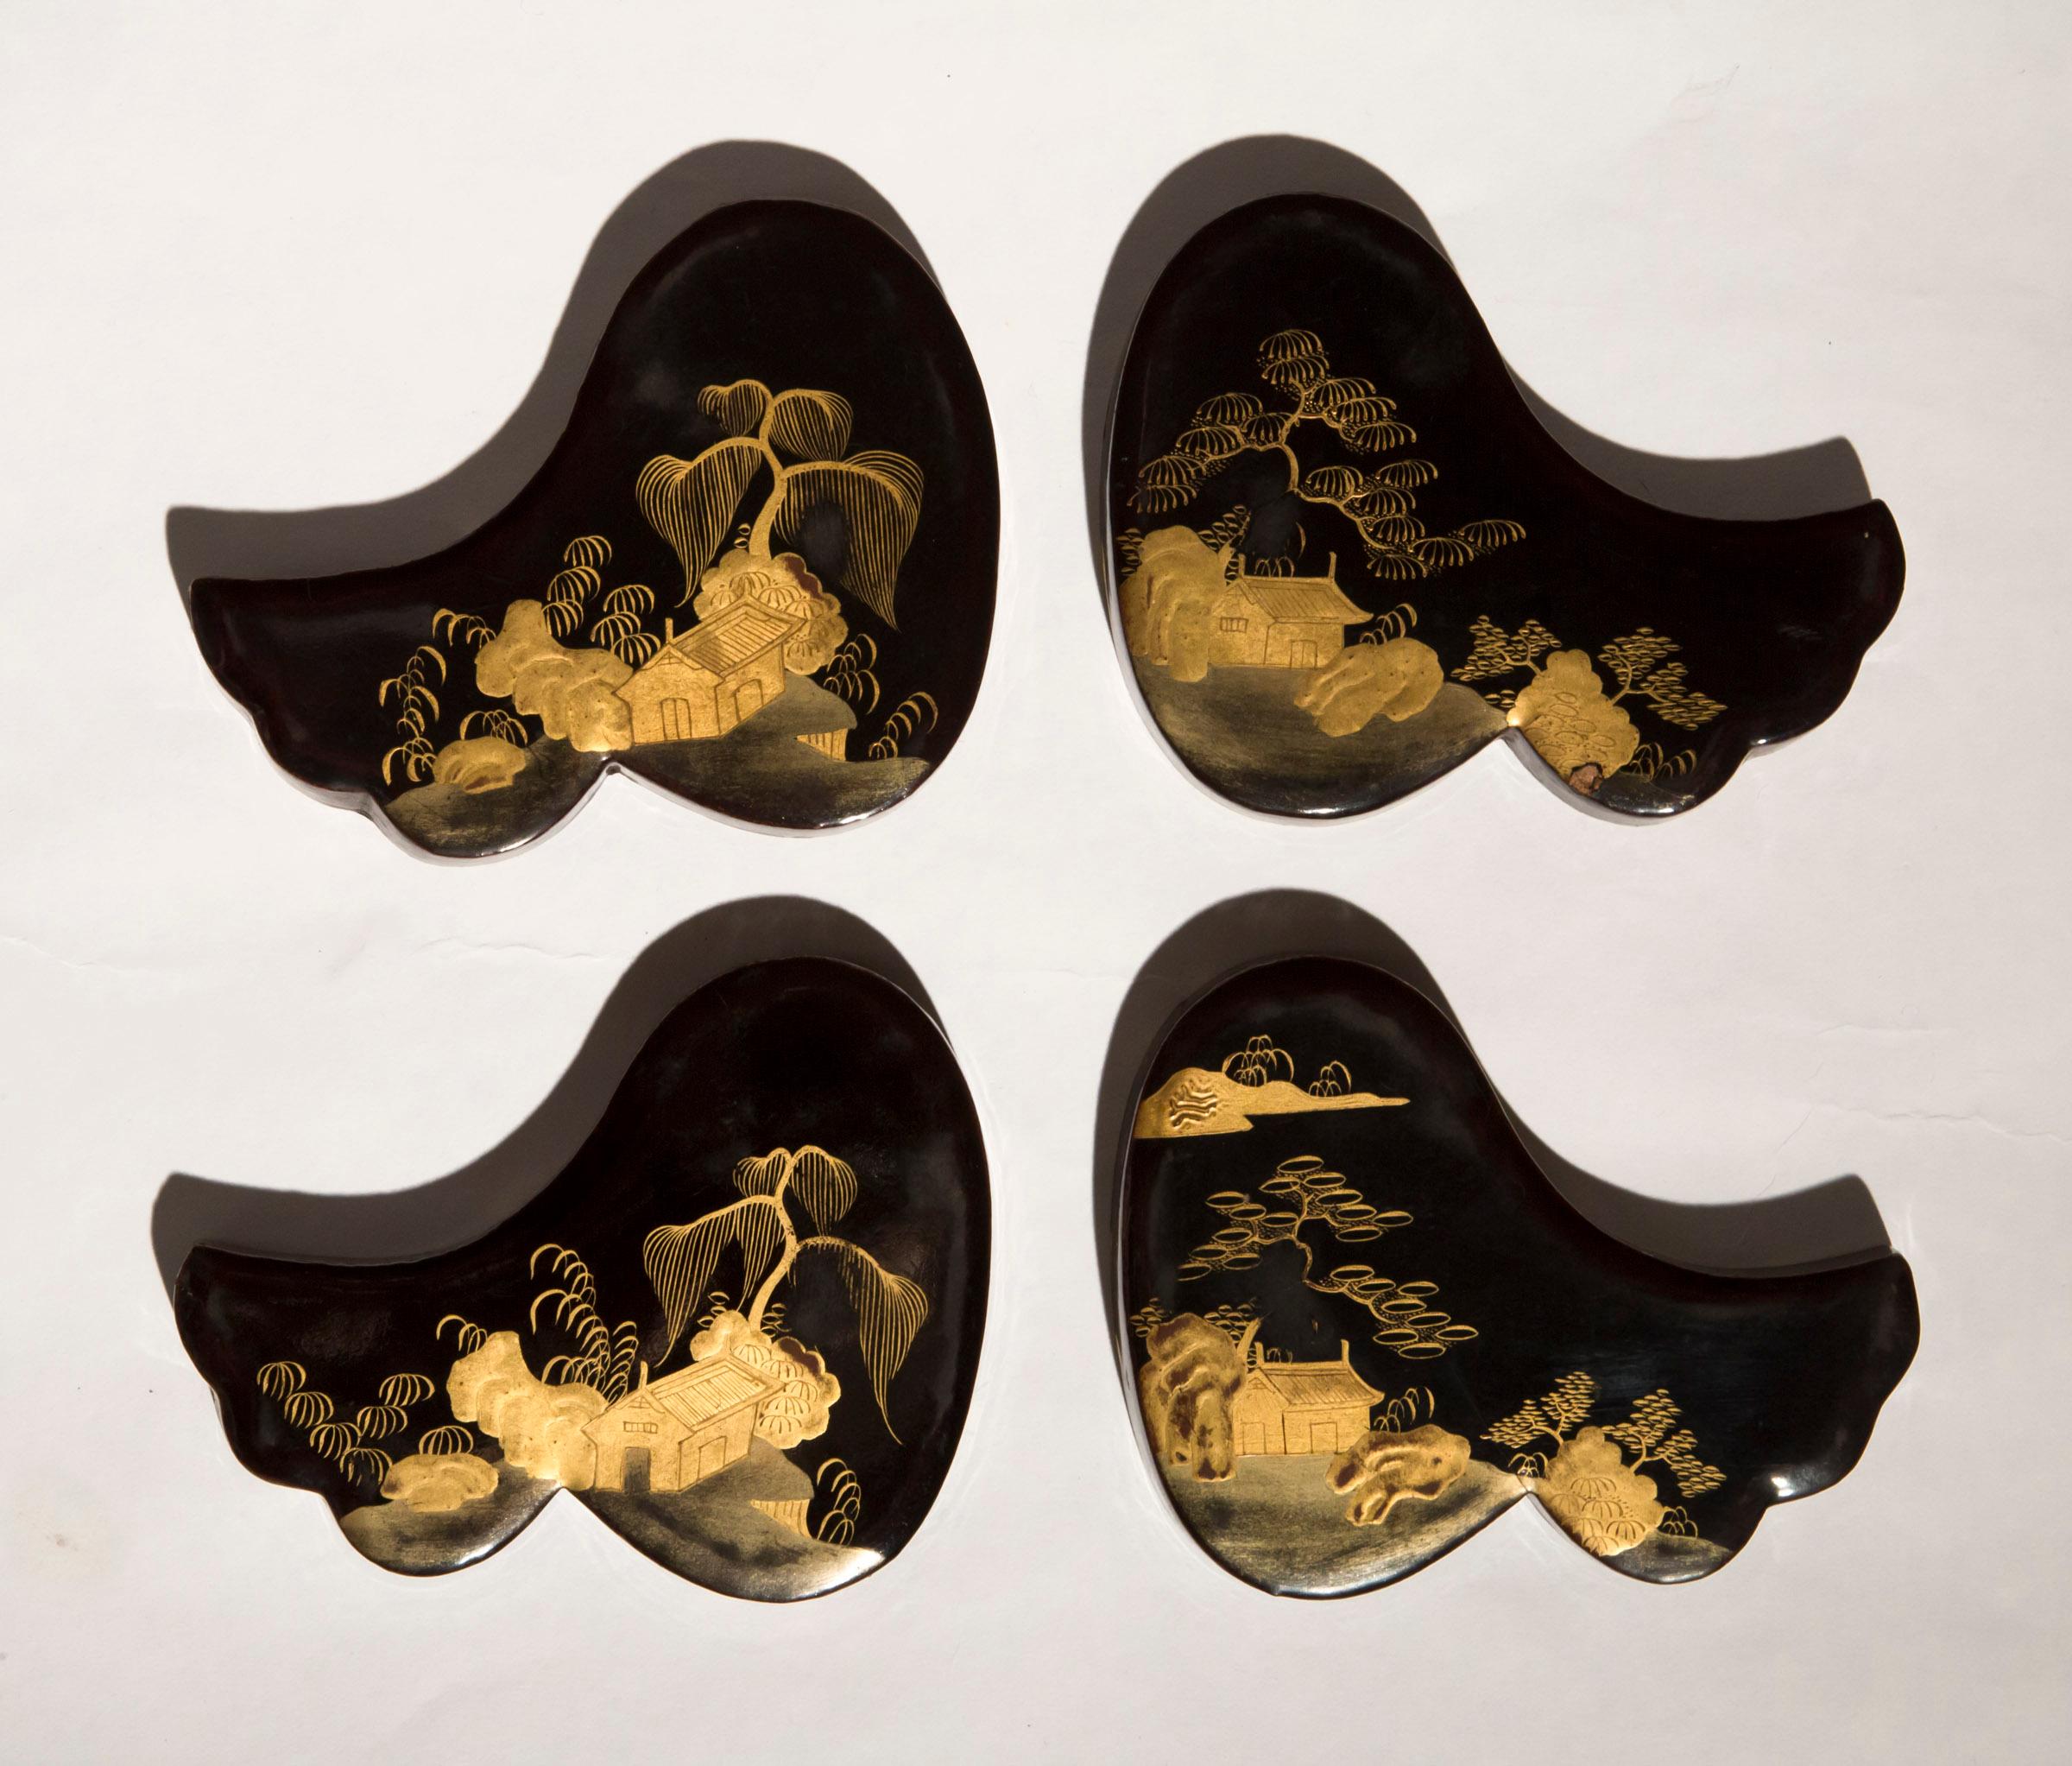 Fine set of eight late 19th century black lacquer and gold decorated nesting boxes, of complex shape, some are lined with felt inside.
Japan, Meiji period, circa 1880.

In good antique condition, minor wear to decoration and occasional age